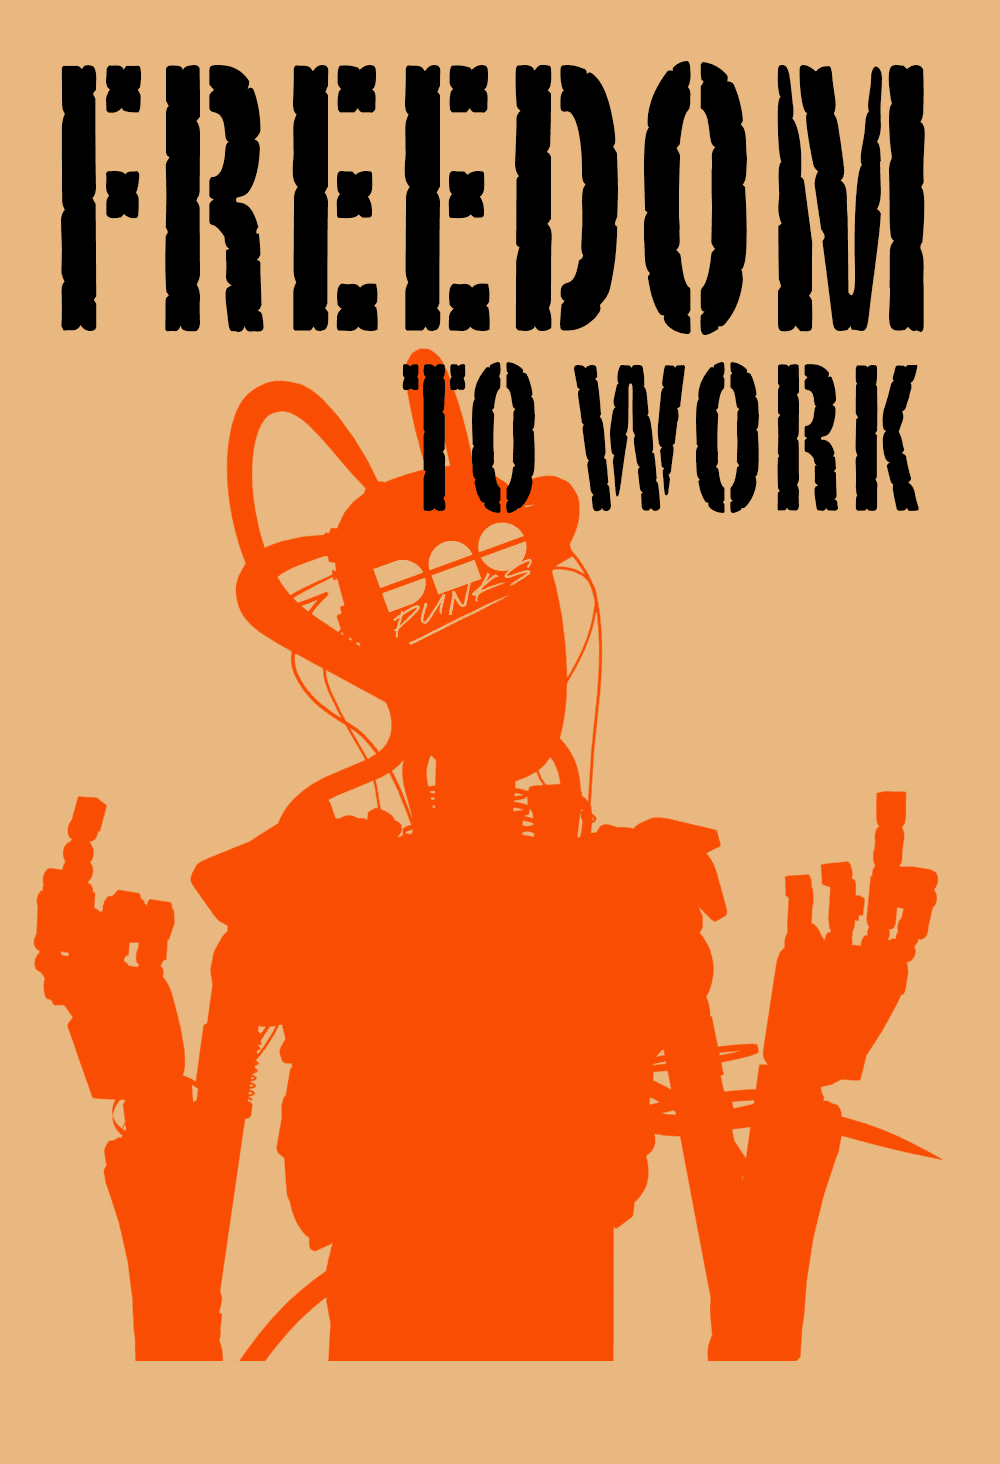 FREEDOM TO WORK